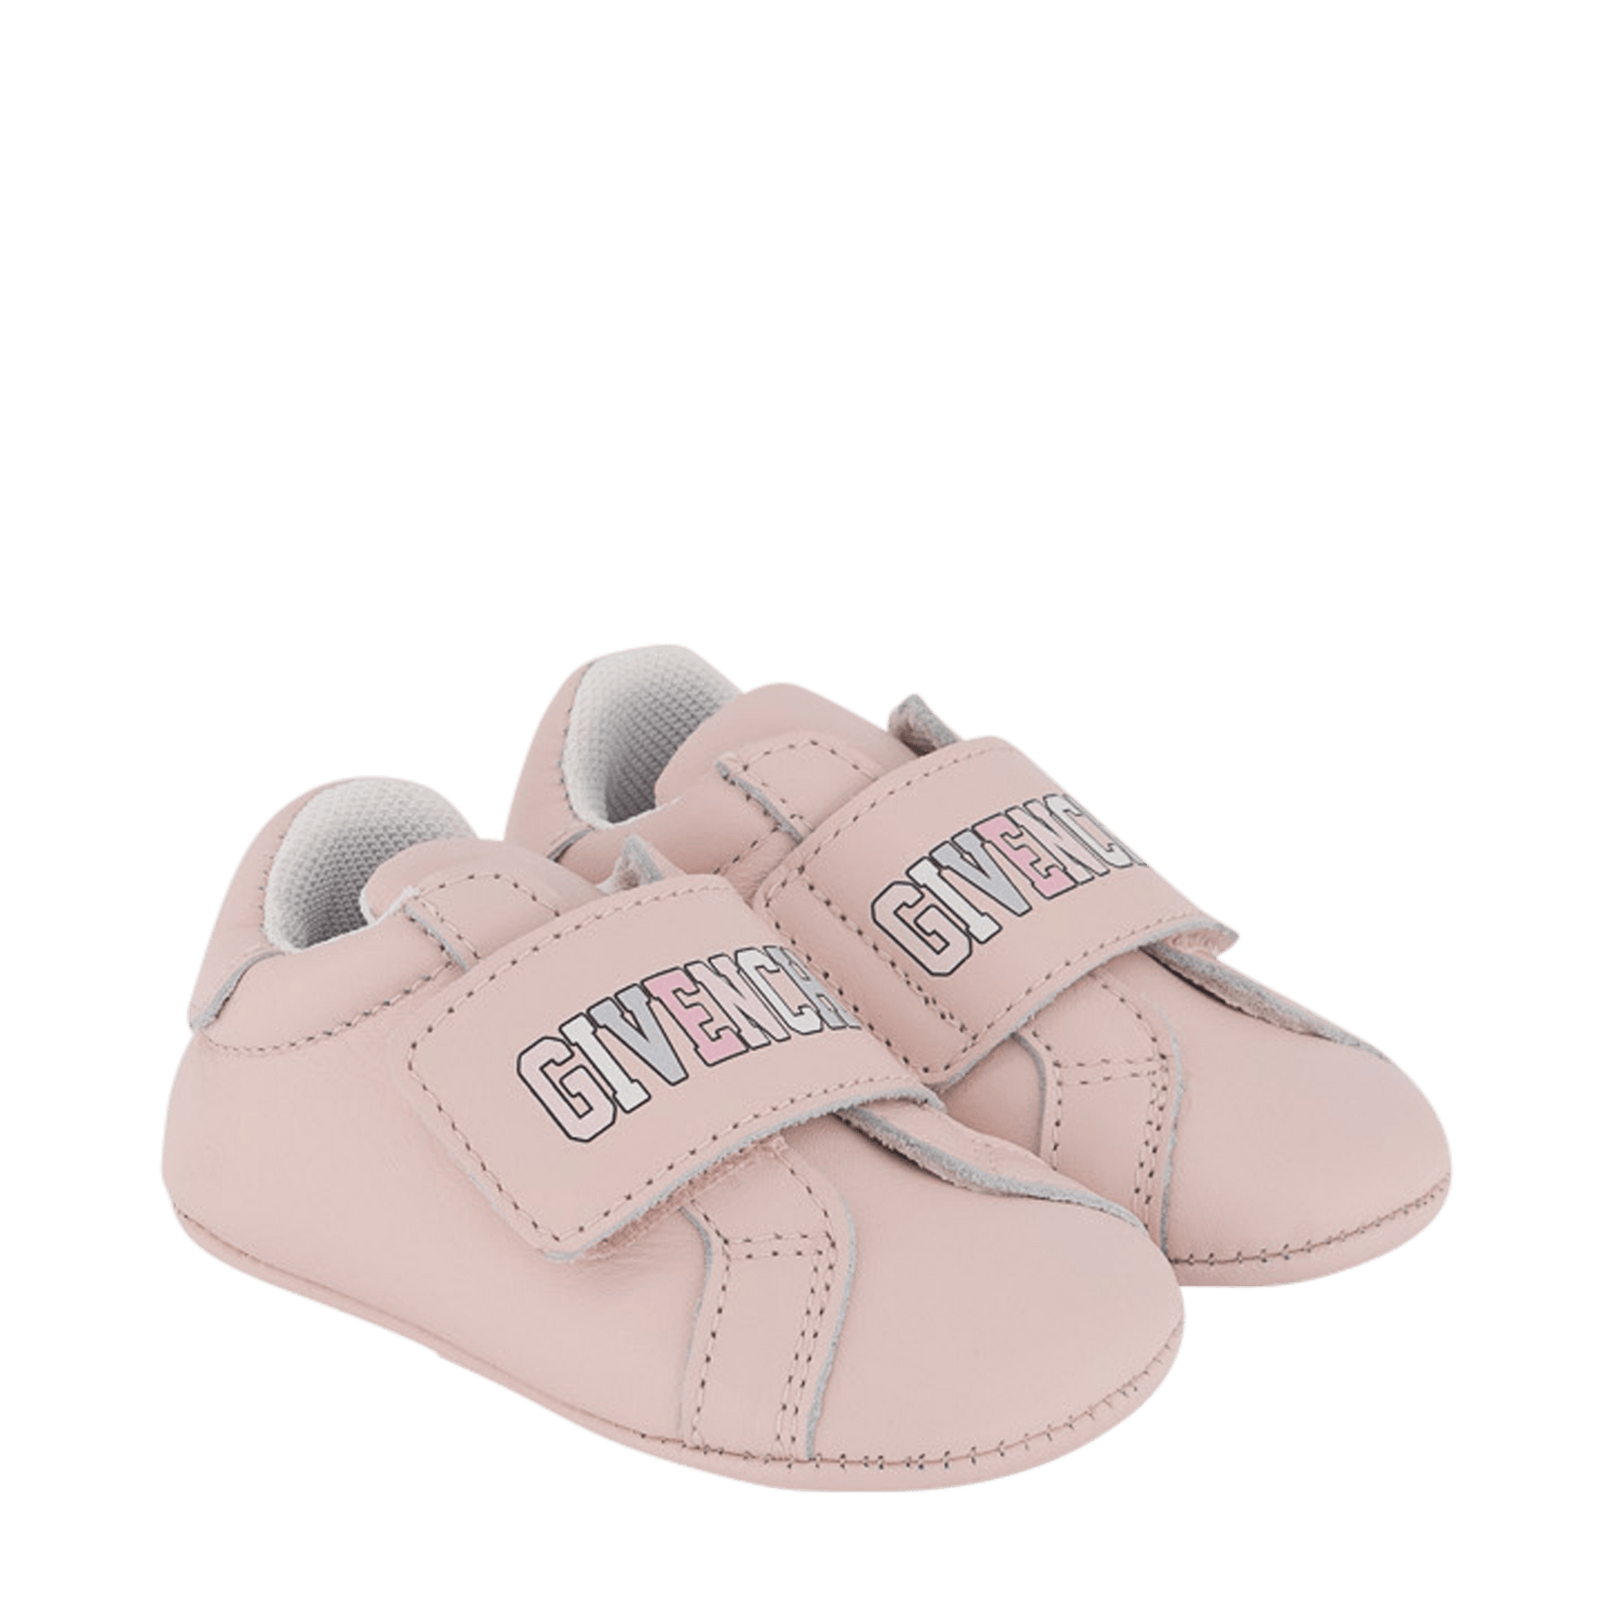 Givenchy Baby Unisex Shoes Light Pink